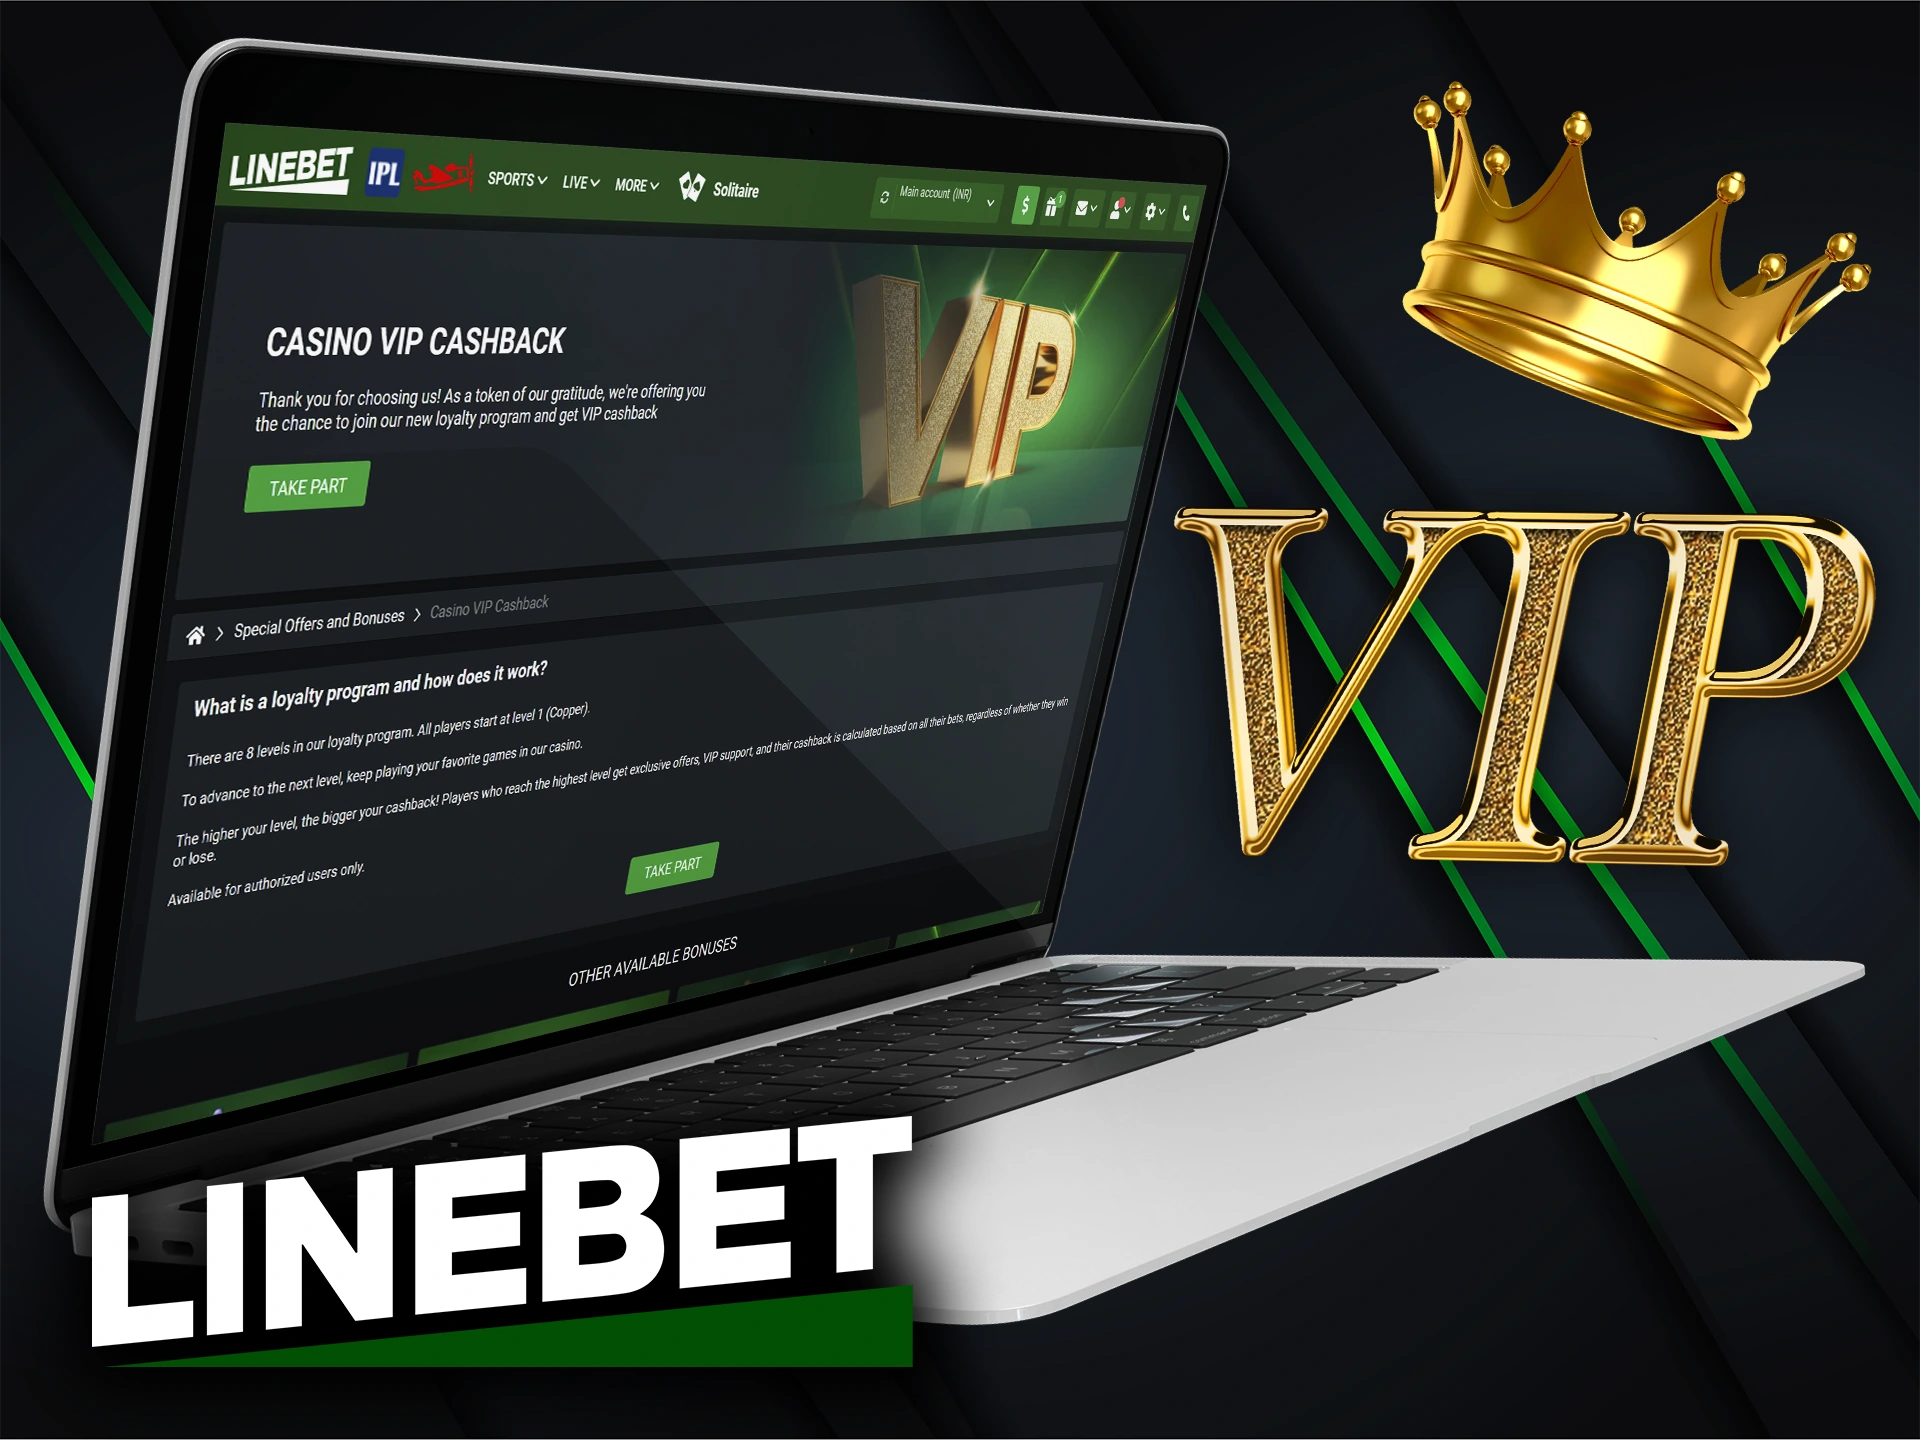 Reach the highest VIP level at Linebet and enjoy the benefits.